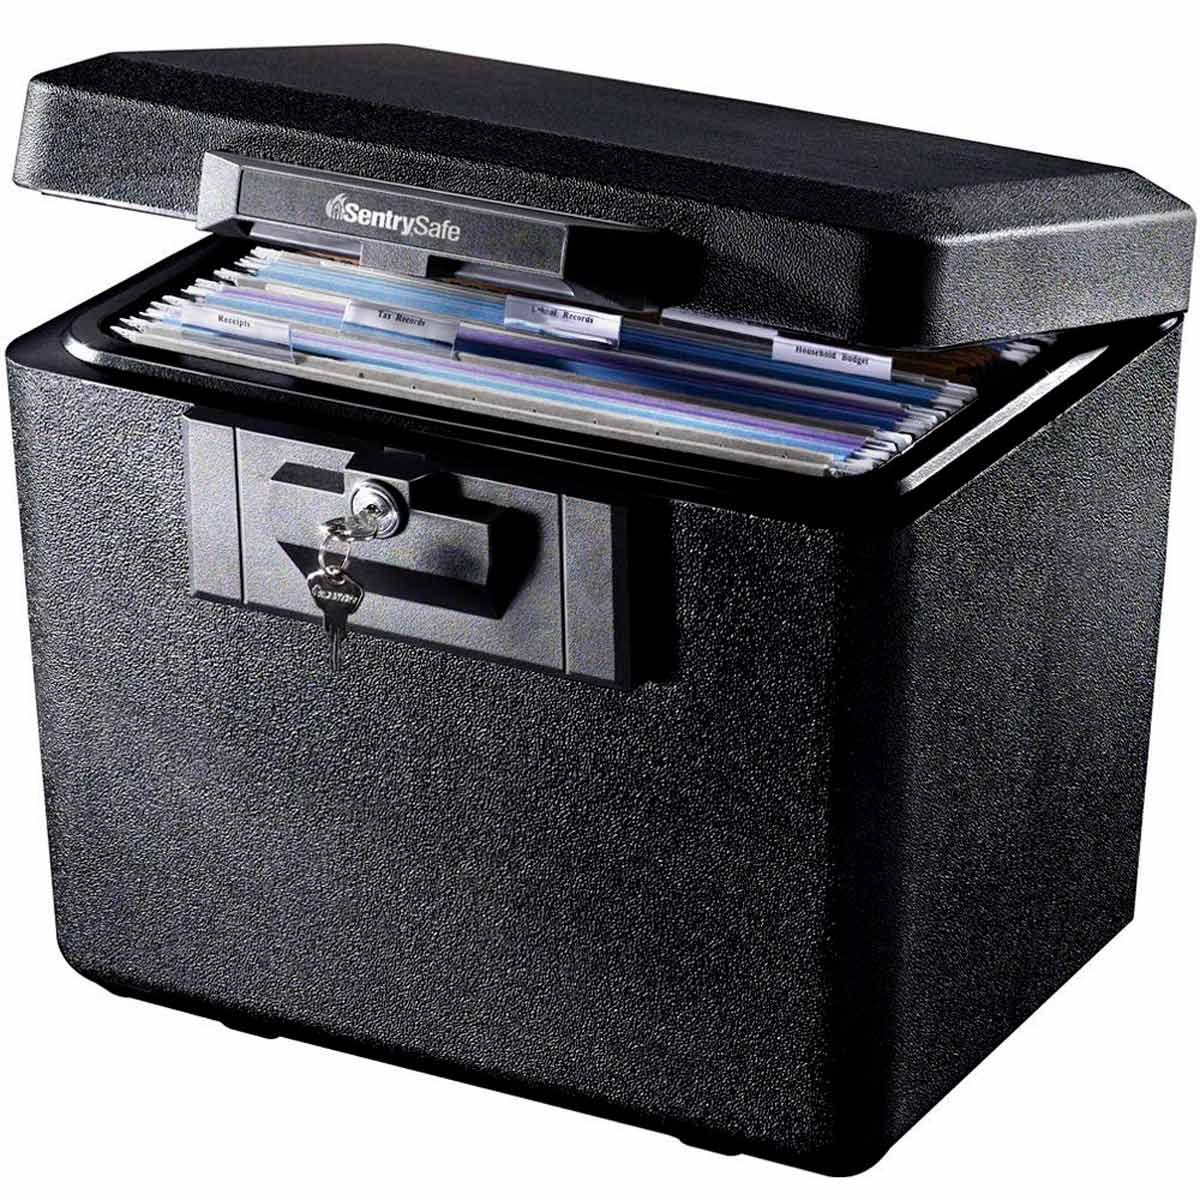 11 Hardworking File Storage Boxes You Need at Home